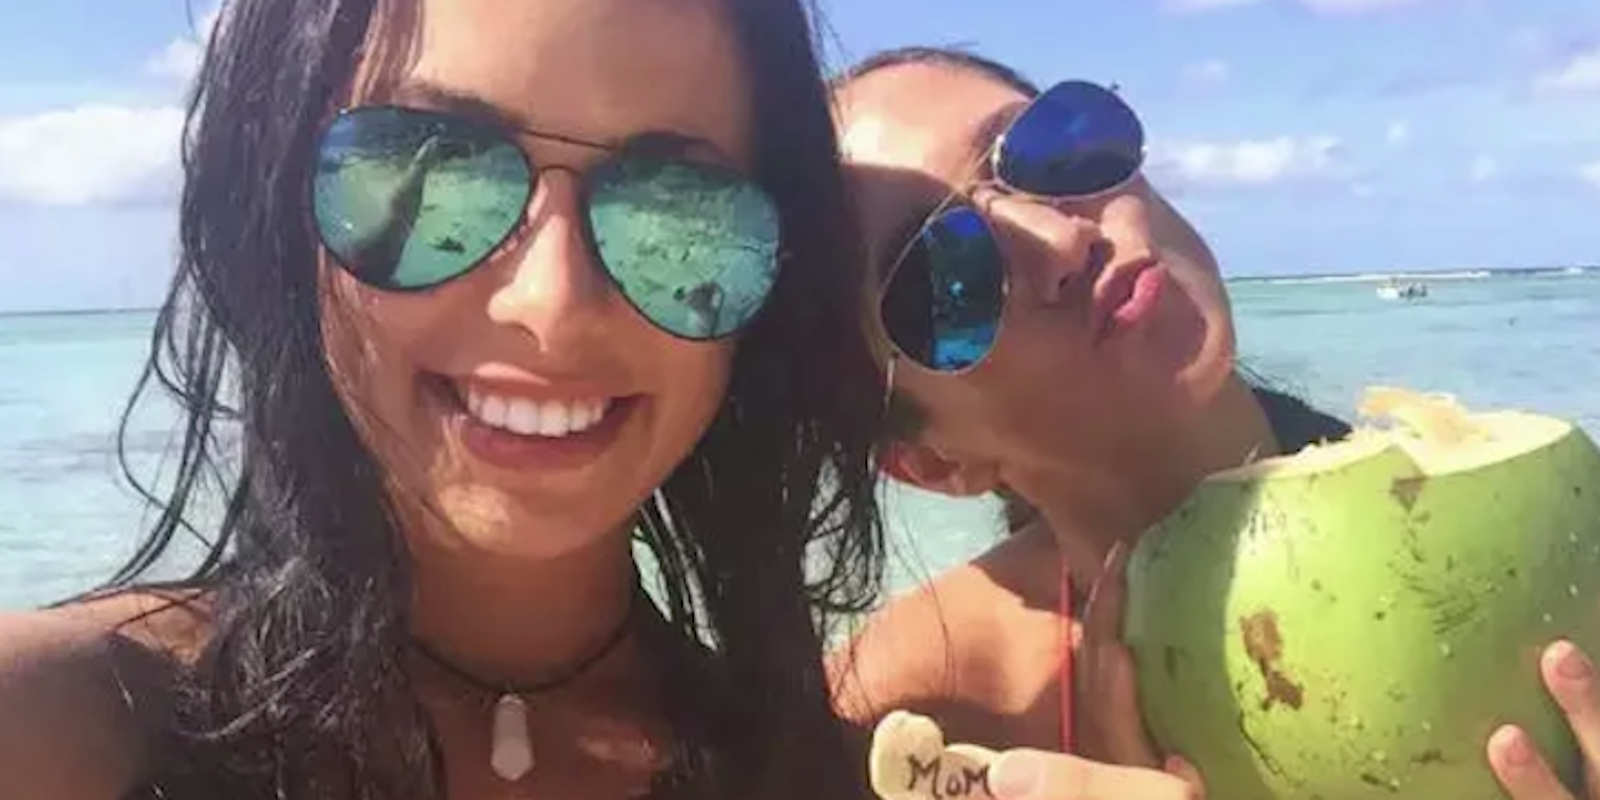 Two girls smile for a selfie in sunglasses, one holds a drink in a coconut